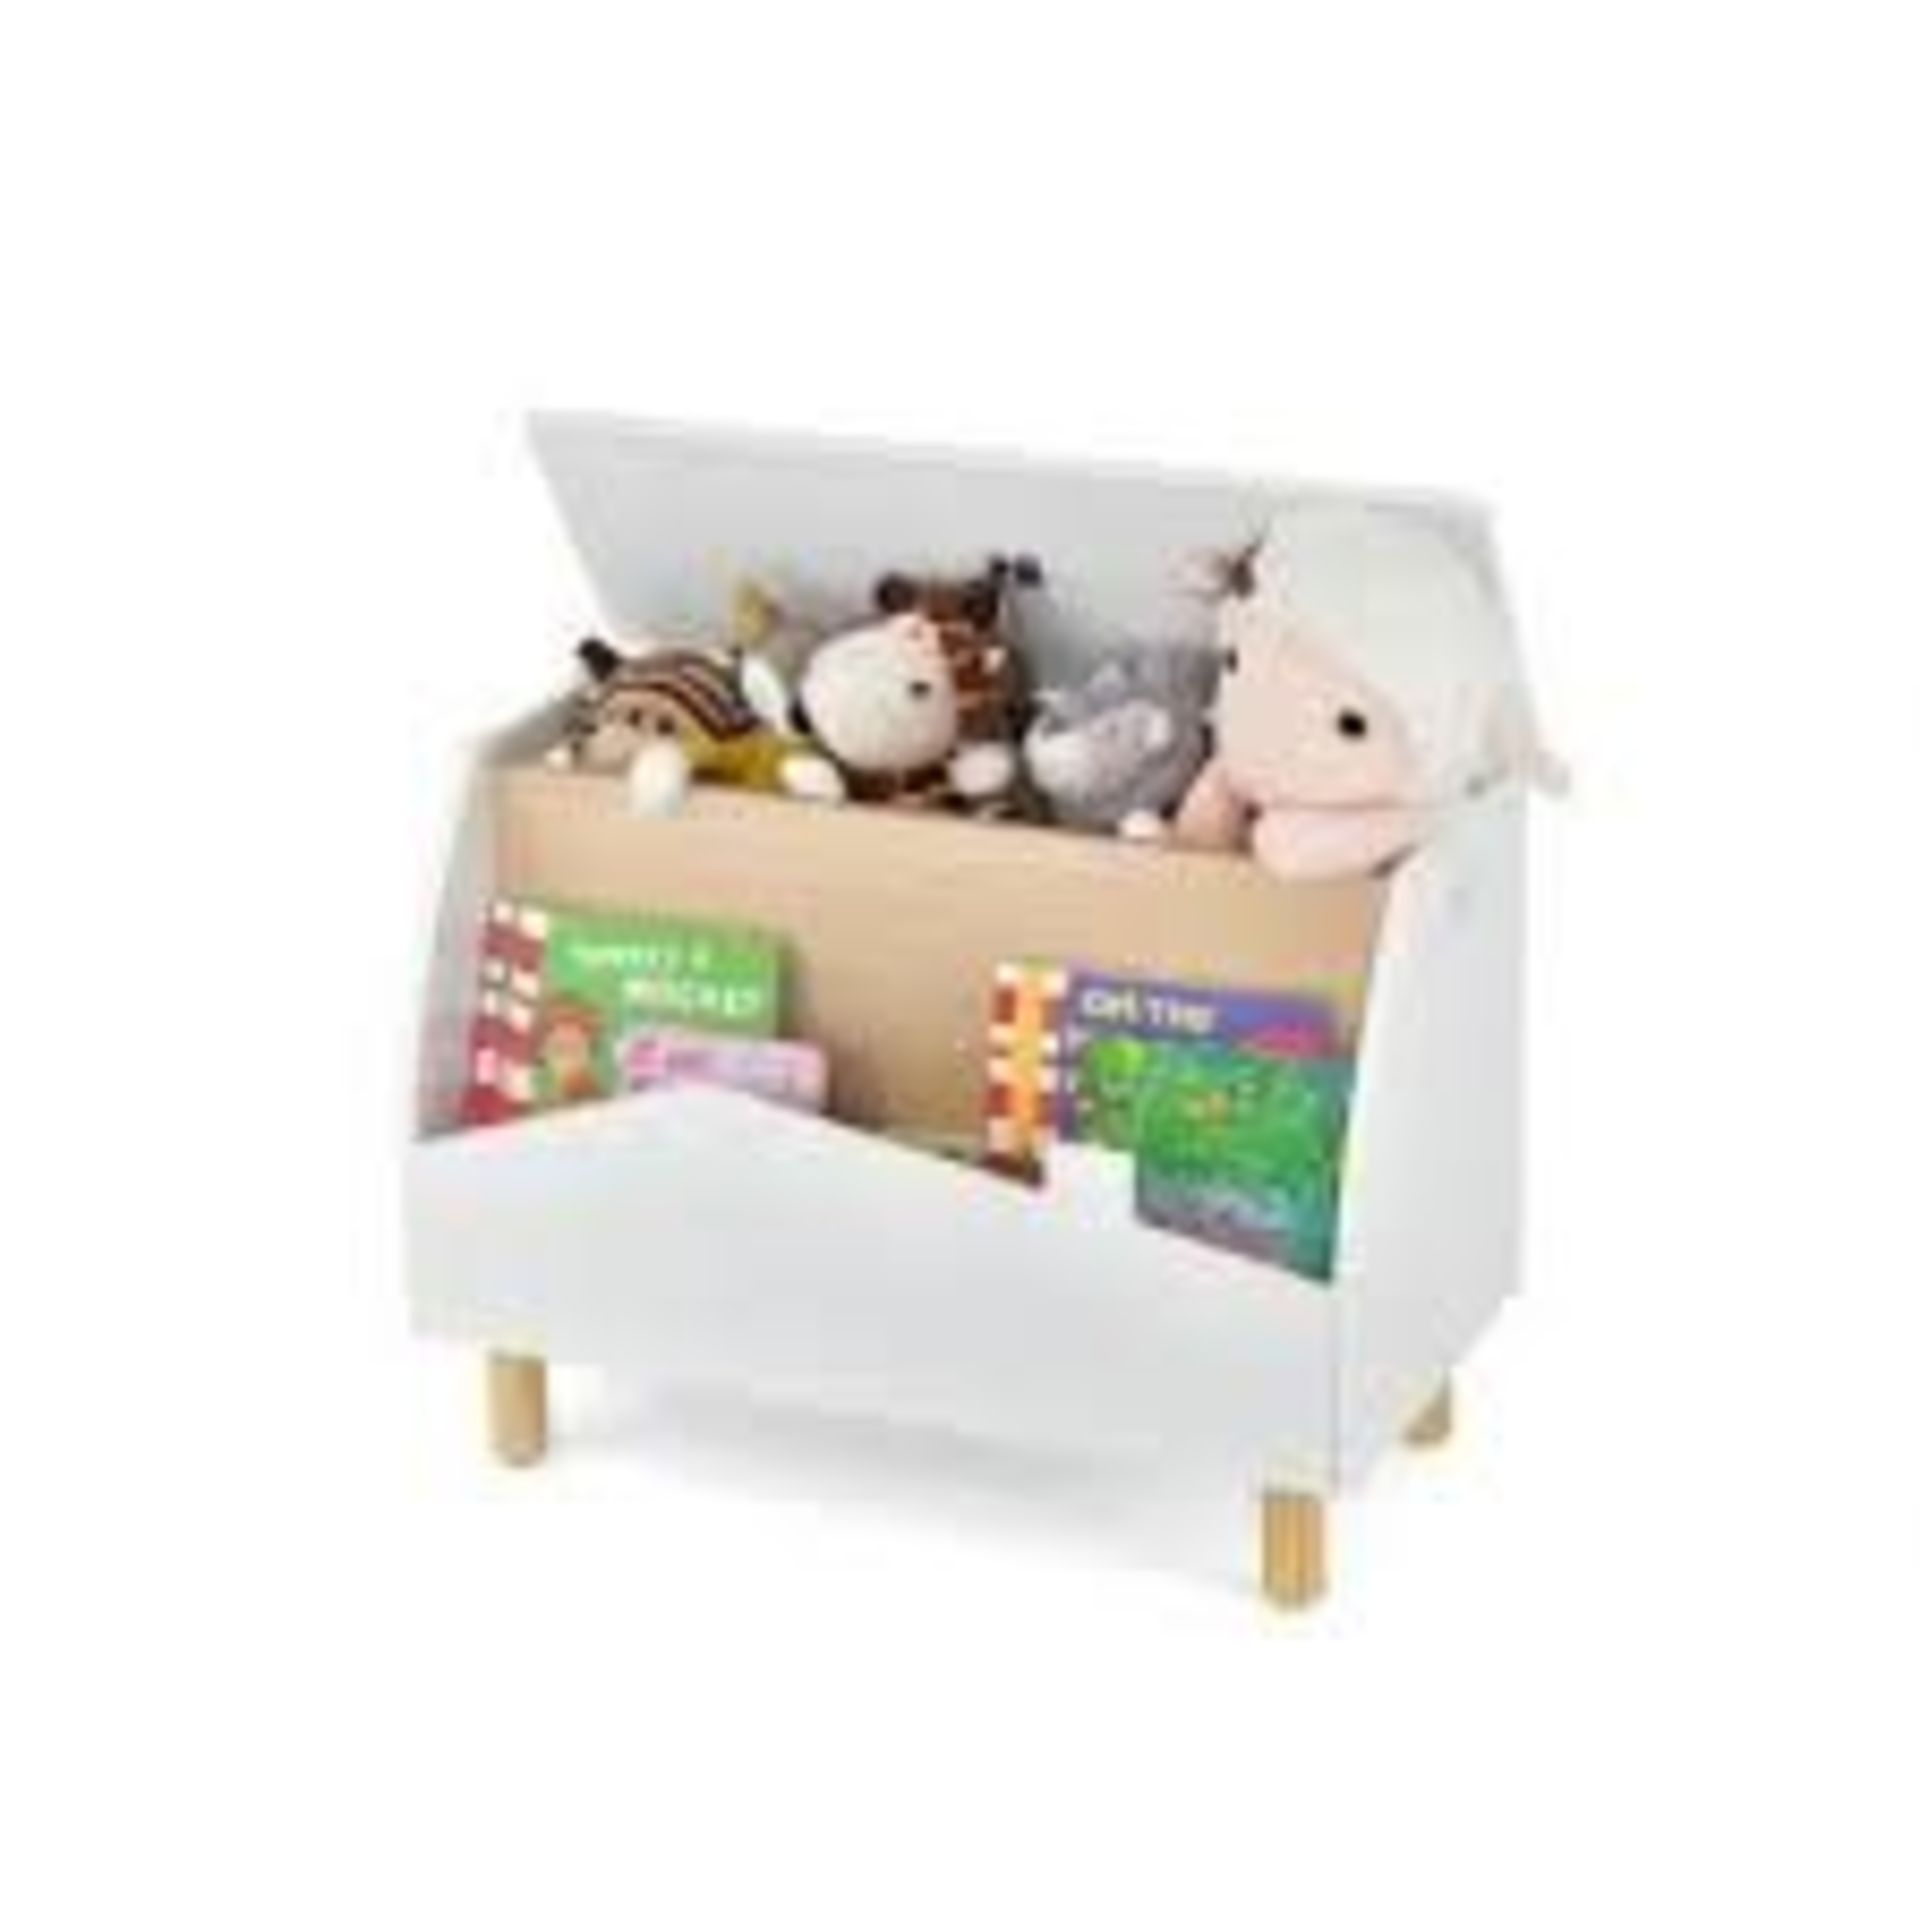 Multifunctional Kids Toy Box with Safety Hinge for Playroom. - ER53.